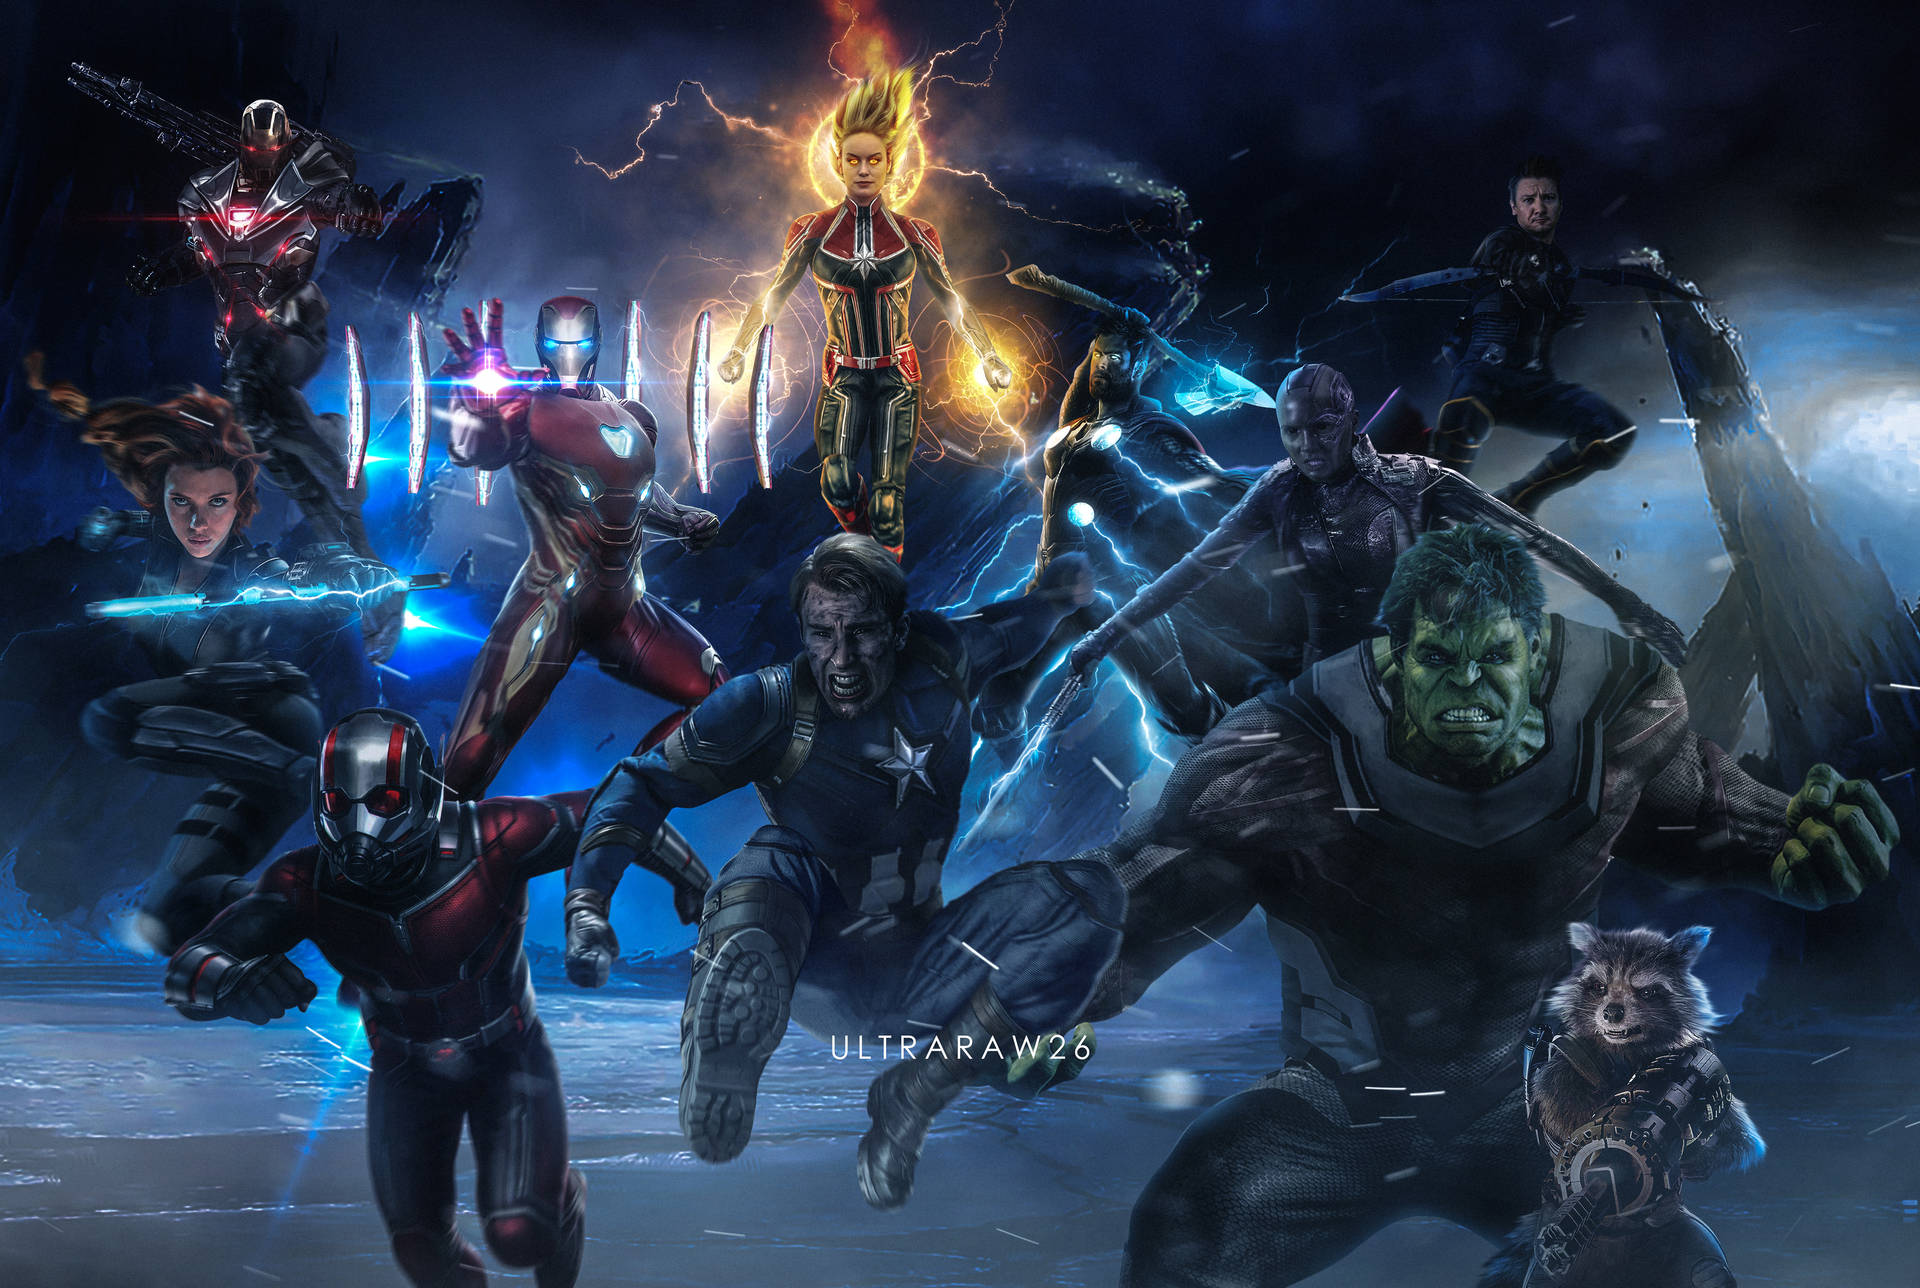 The Avengers assemble on the battlefield in an epic battle to save the universe. Wallpaper